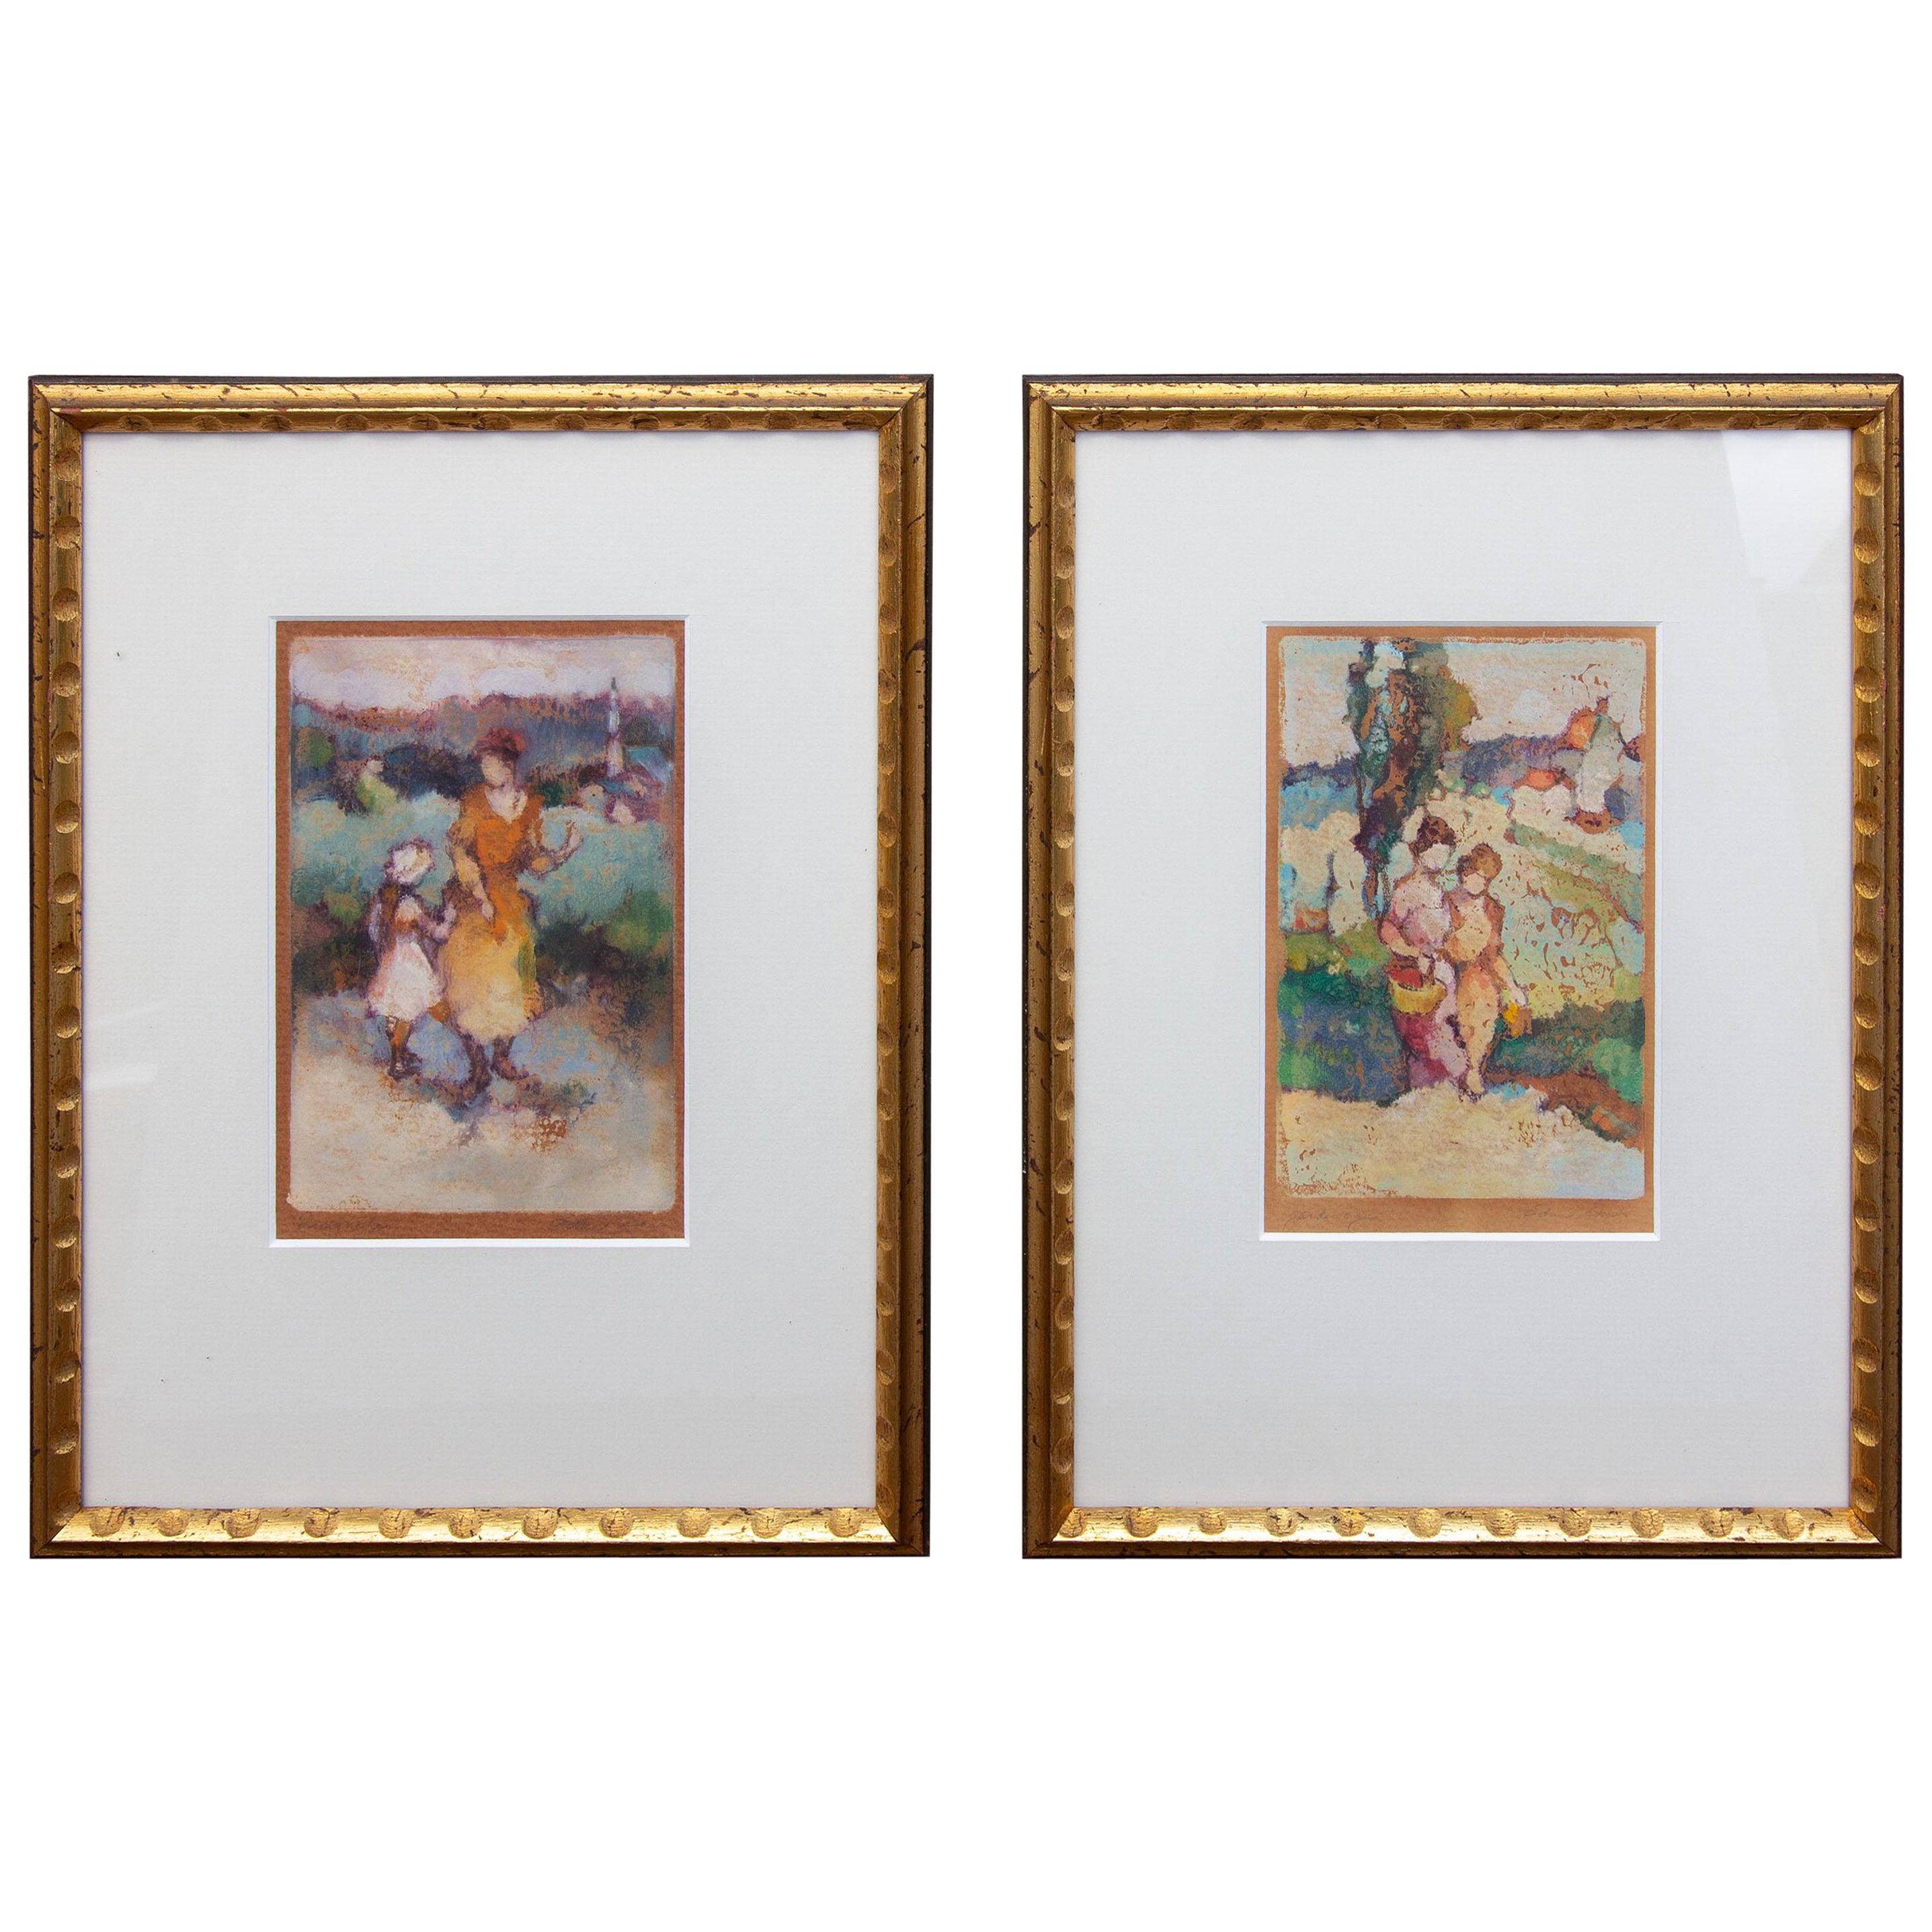 Edna Gass, Early 20th Century Landscape Print - Antique French Impressionist Prints by Edna Gass a Pair